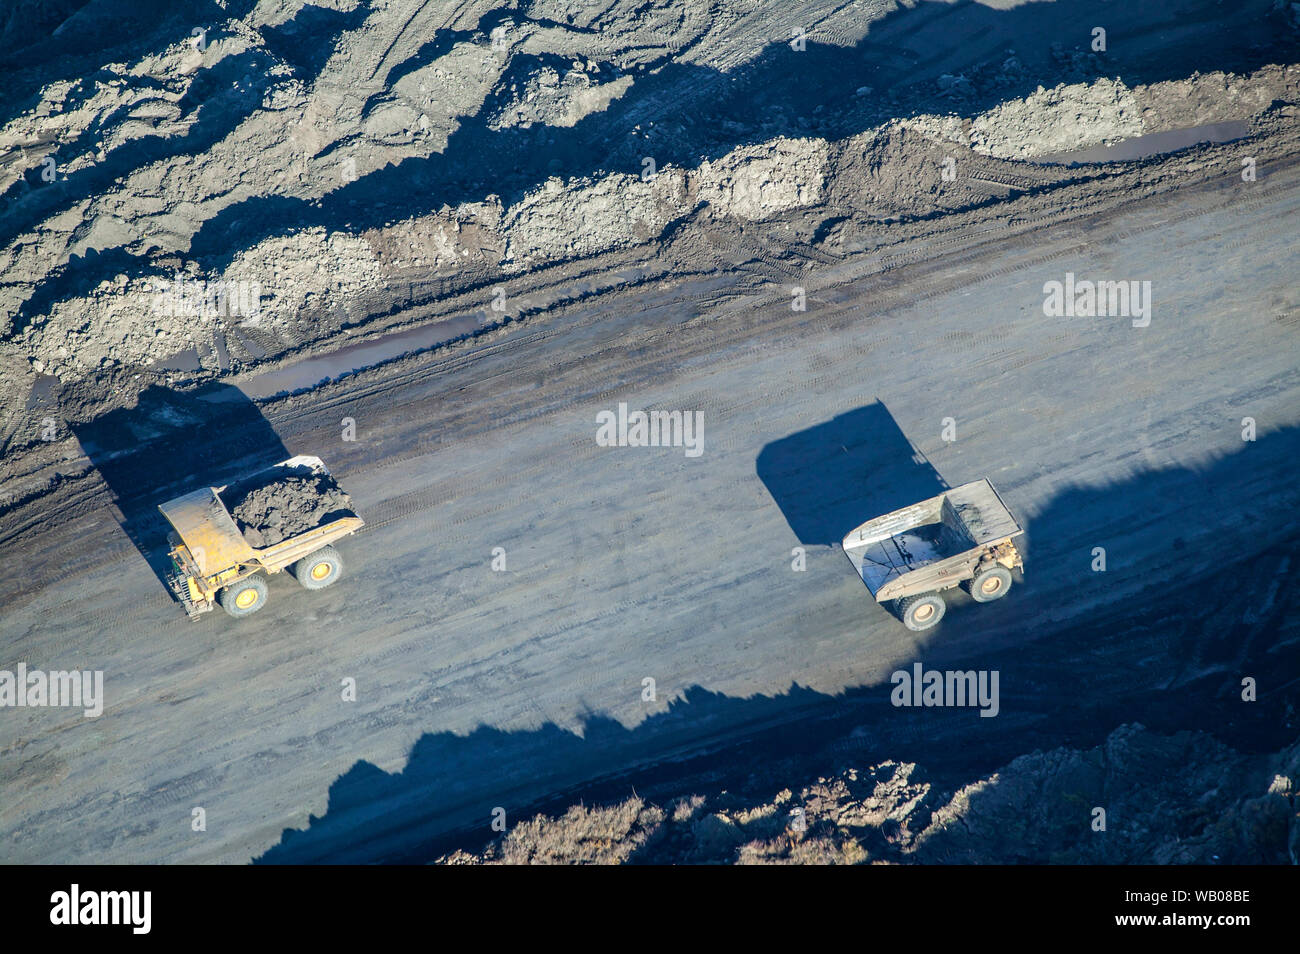 Giant trucks haul bitumen rich ore from mining operations to oil sands plants for processing and exctraction north of Fort McMurray, Alberta, Canada. Stock Photo